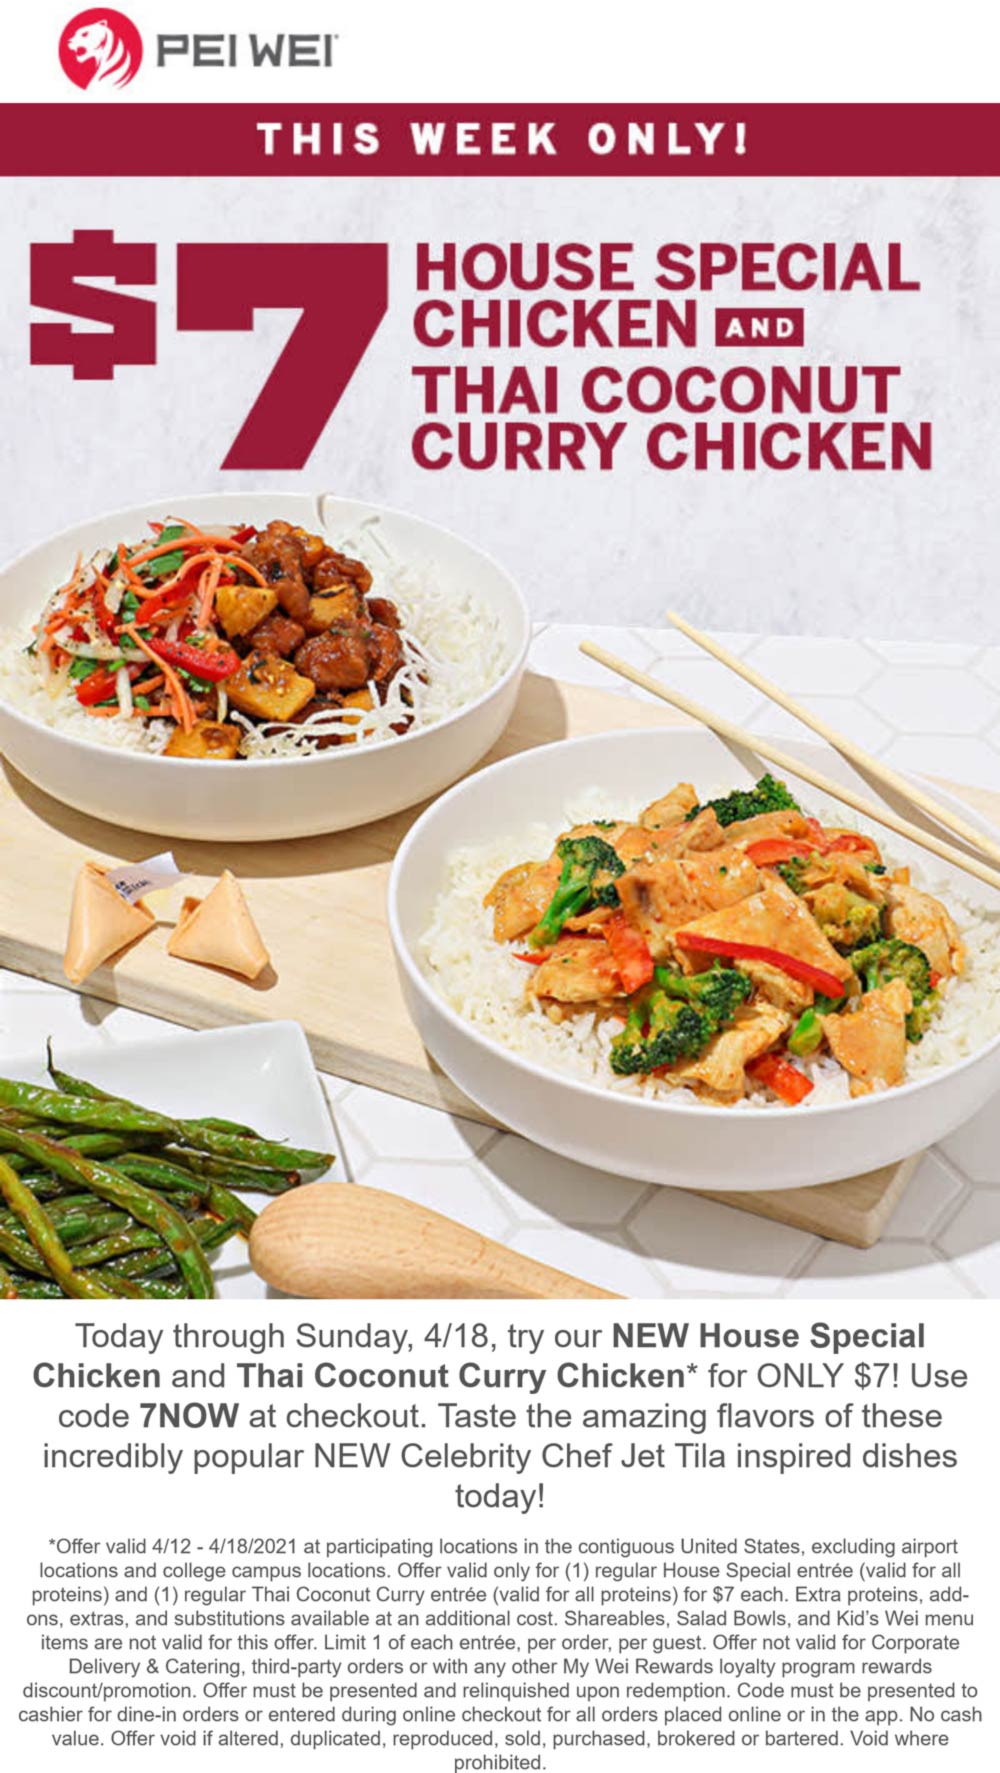 Special chicken entree + coconut curry chicken entree = 7 at Pei Wei